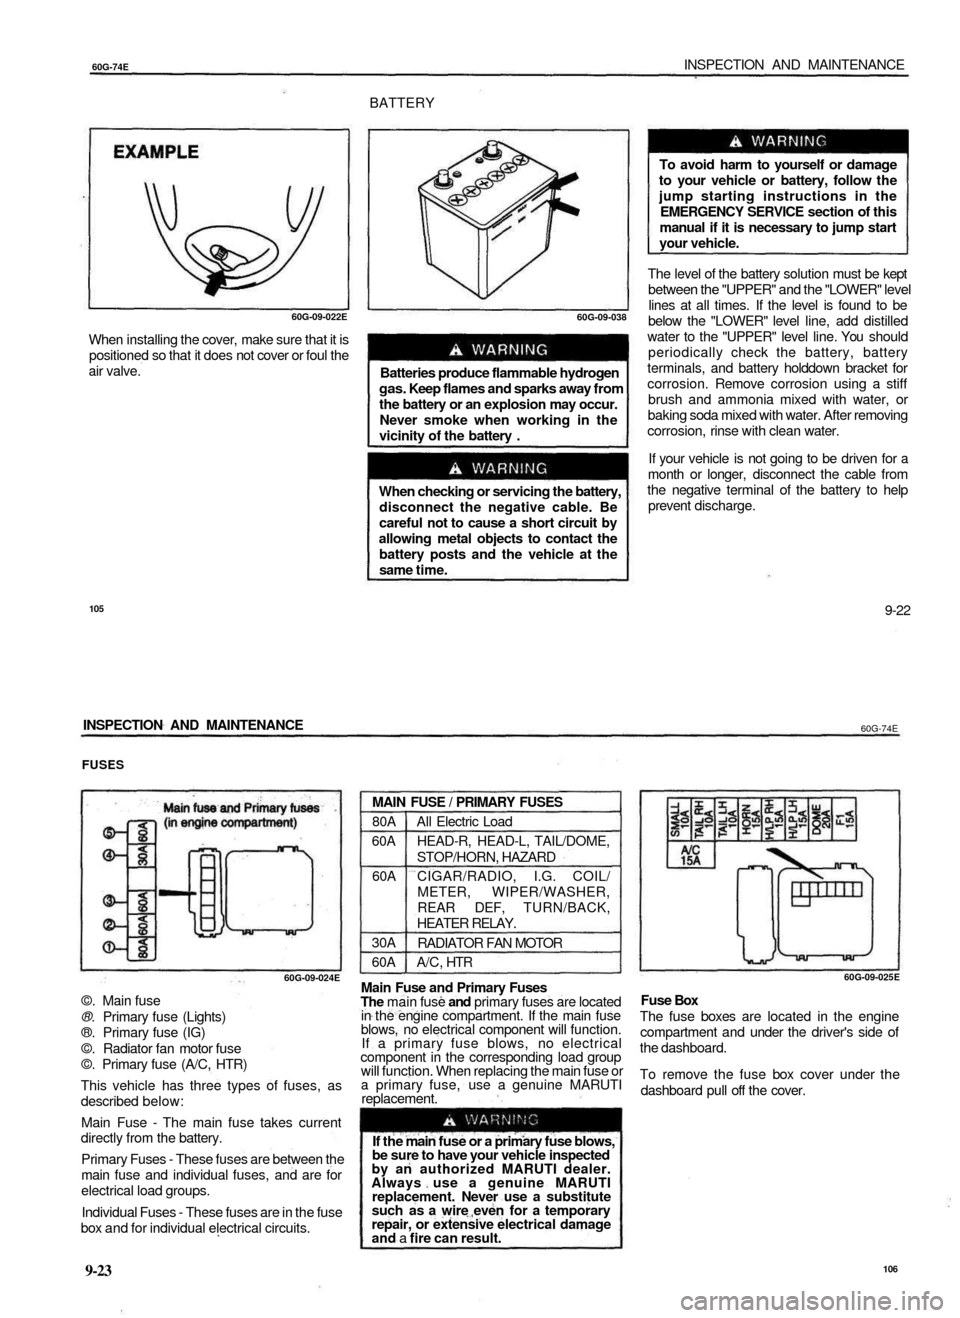 SUZUKI BALENO 1999 1.G Owners Manual 
60G-74E 
INSPECTION AND MAINTENANCE

BATTERY

60G-09-022E

When installing the cover, make sure that it is

positioned so that it does not cover or foul the

air valve. 
60G-09-038

Batteries produce